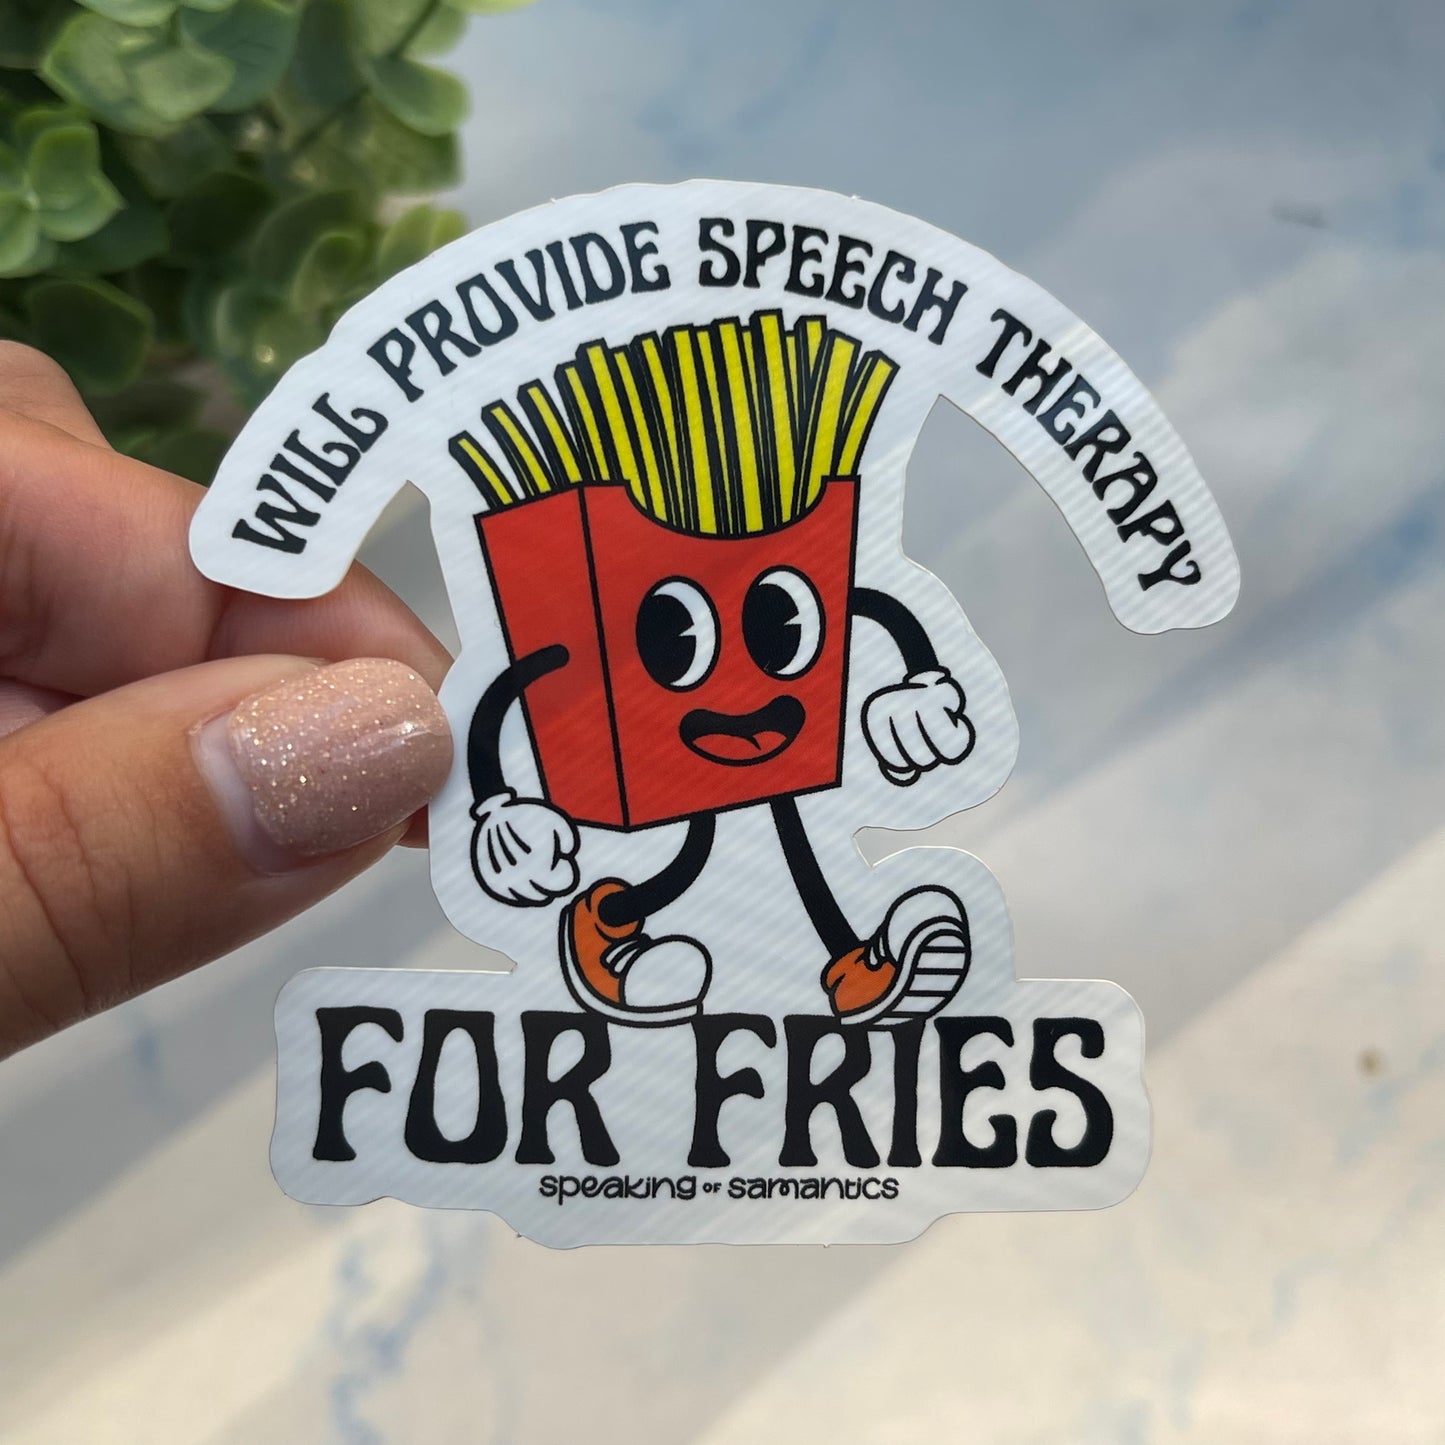 Will Provide Speech Therapy for Fries Sticker